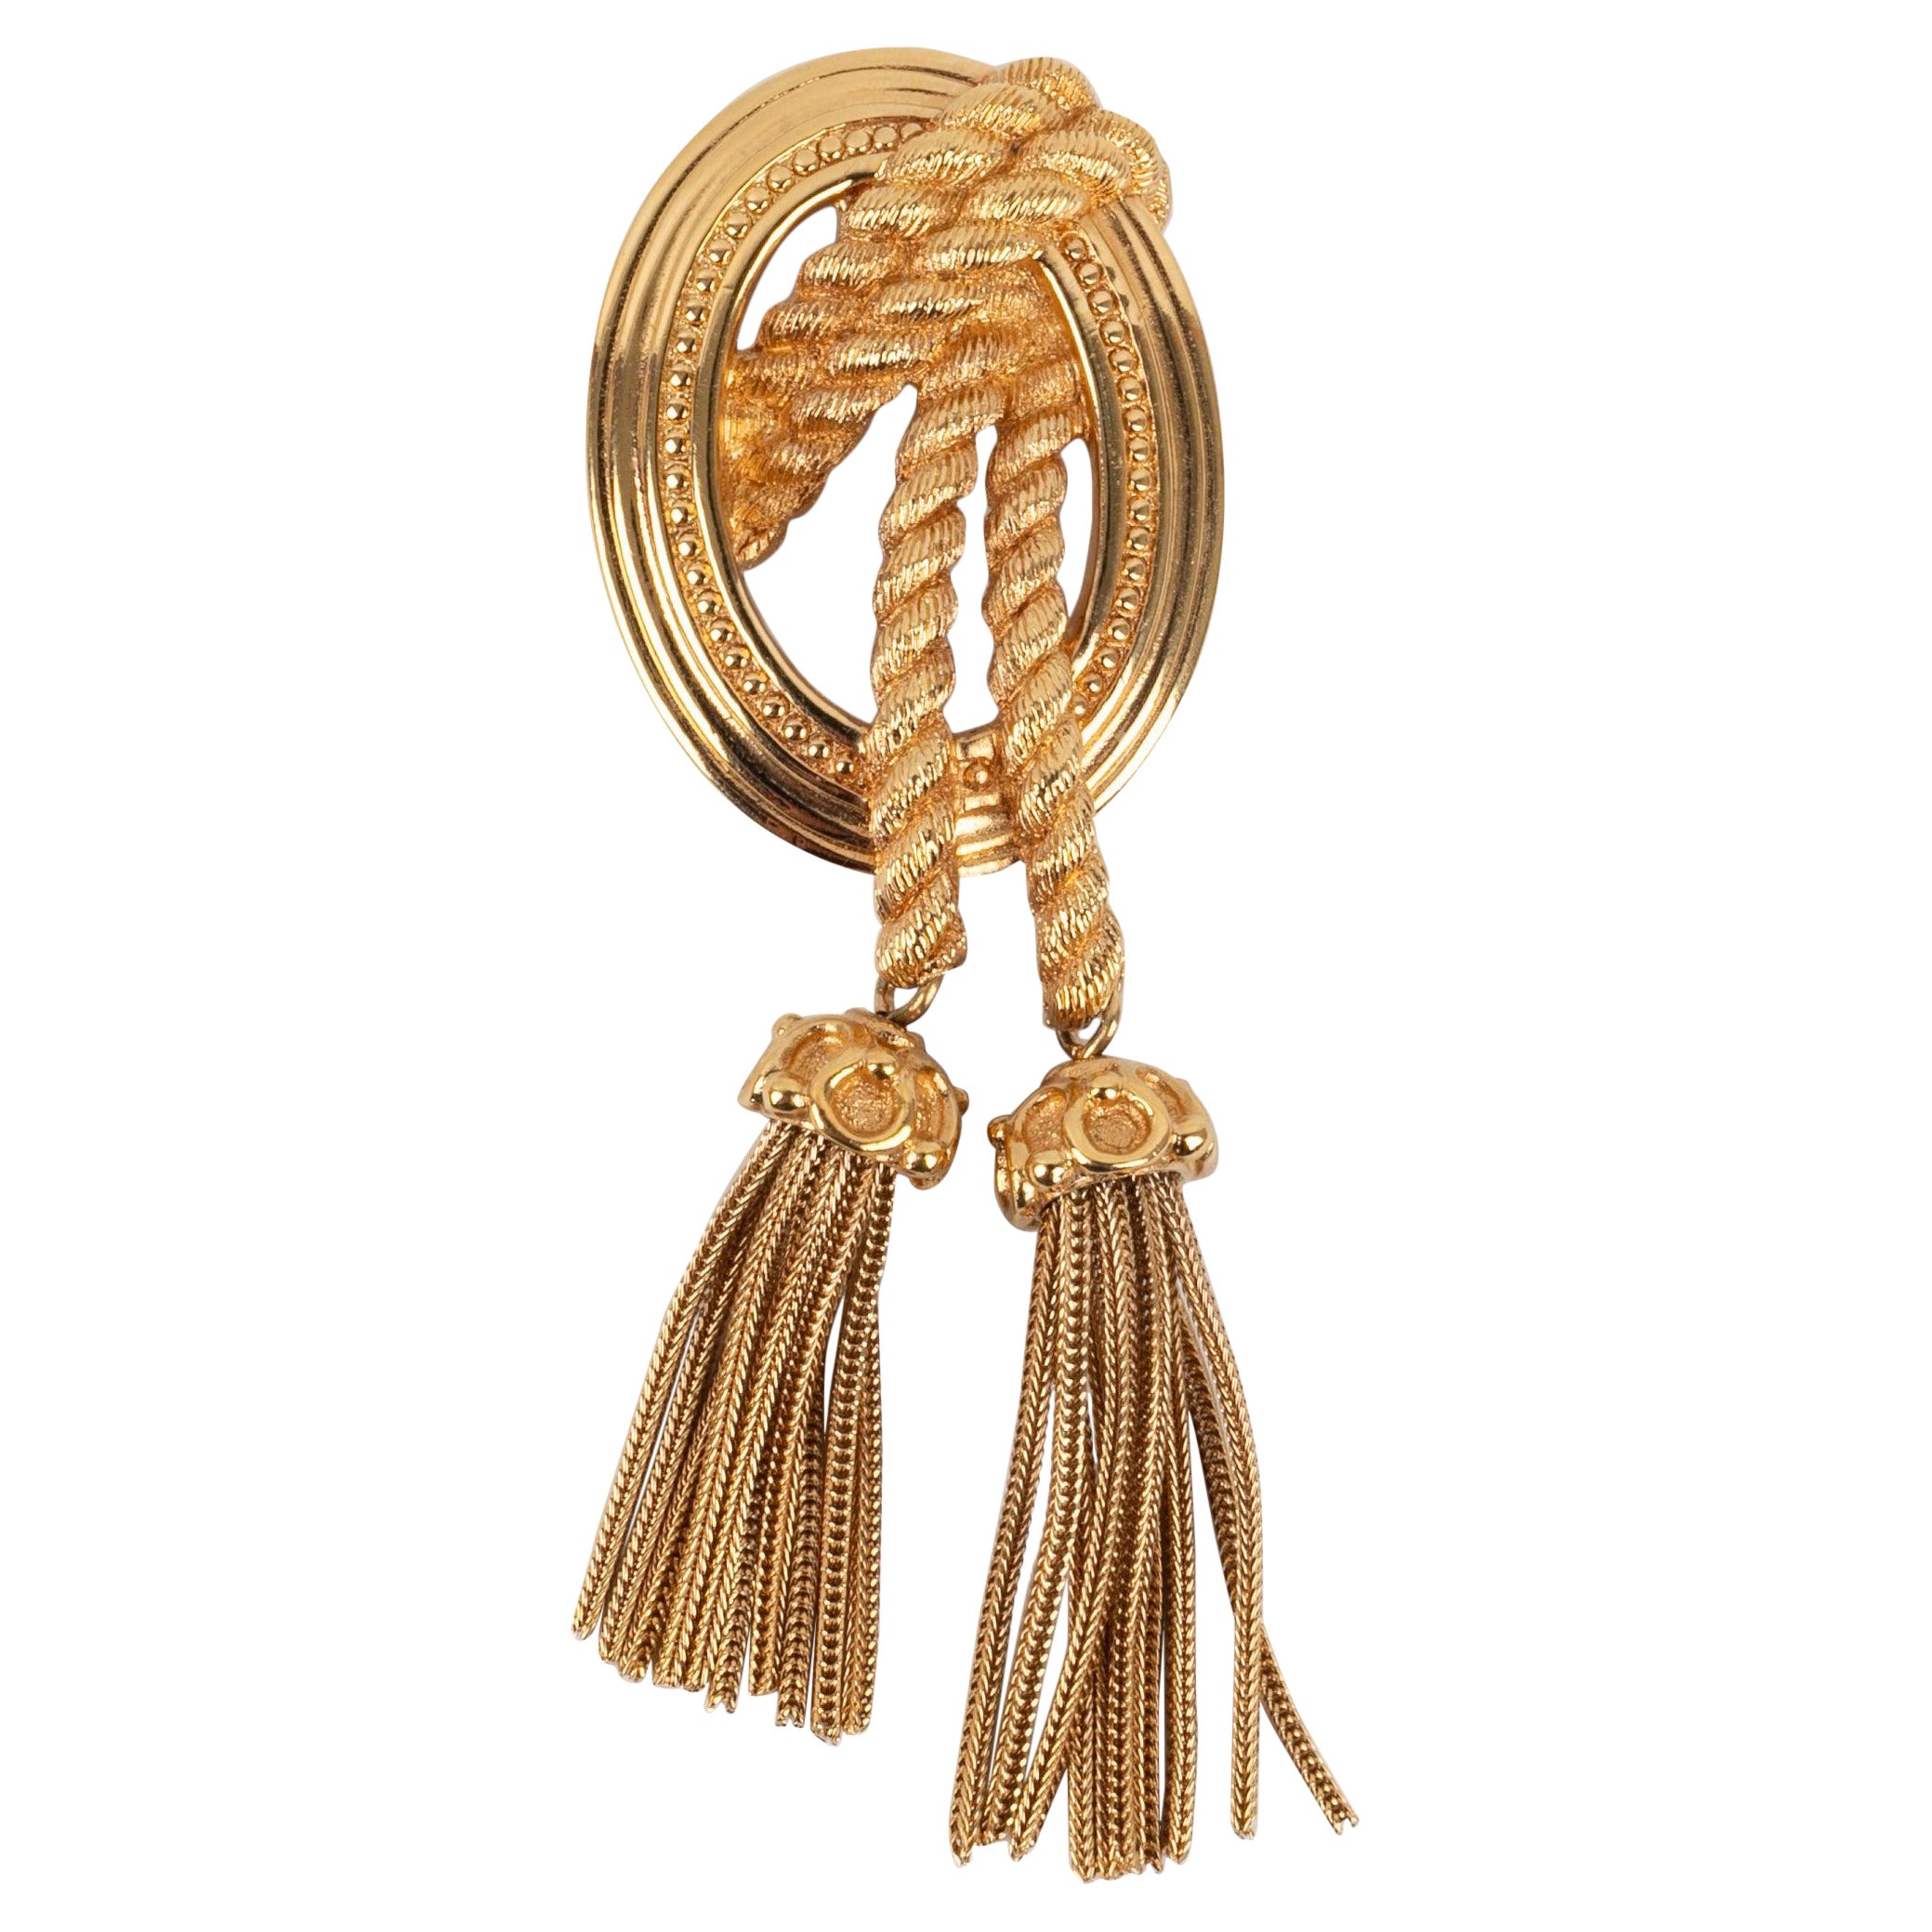 Dior Brooch in Gold-Plated Metal